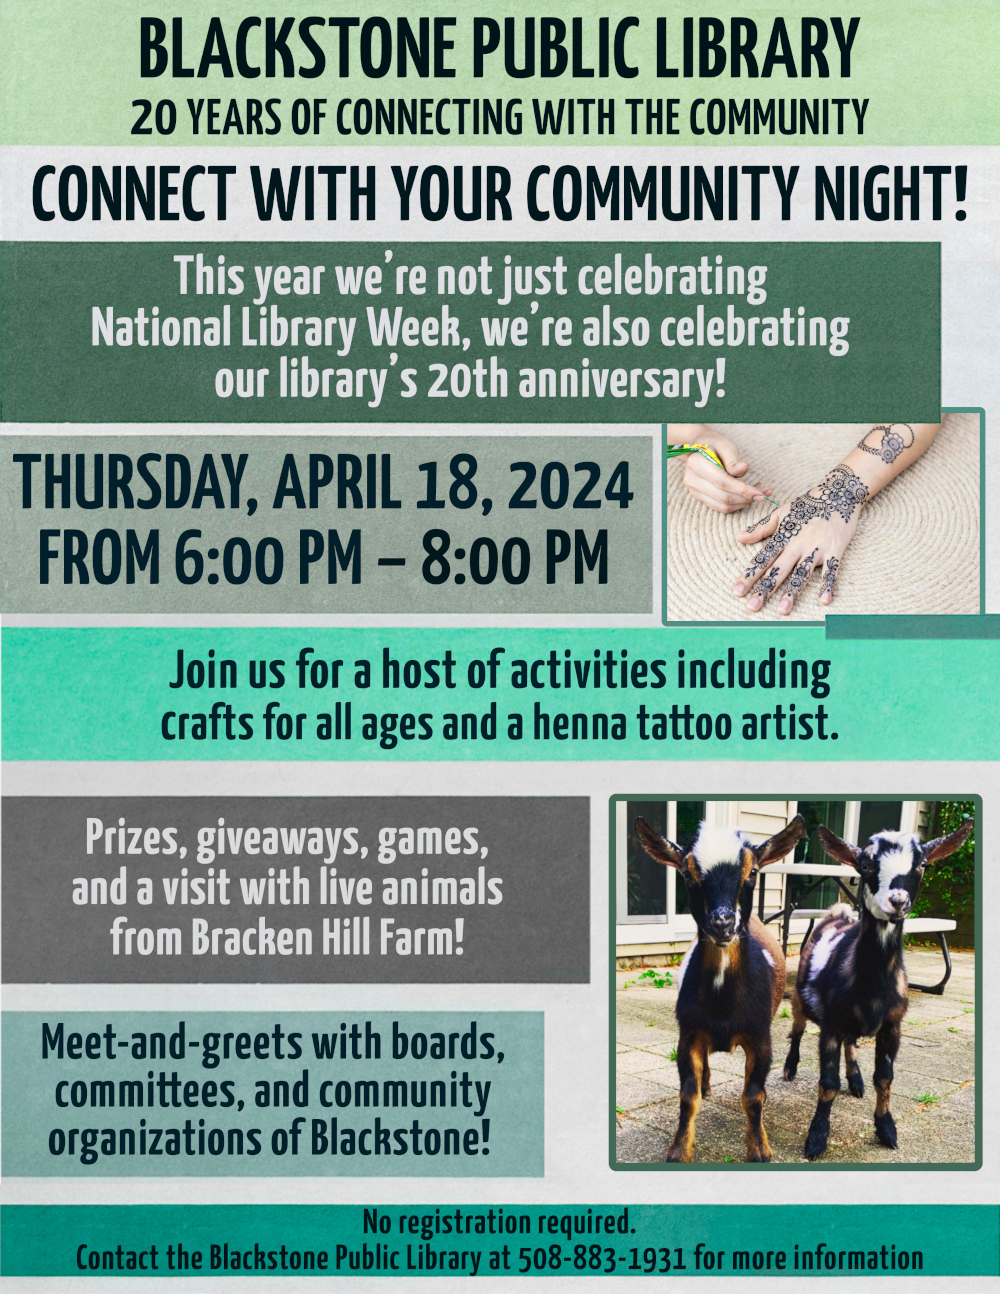 Blackstone Public Library, 20 Years of Connecting with the Community. Connect with your community night! Thursday, April 18 from 6PM to 8 PM.  This year we’re not just celebrating National Library Week, we’re also celebrating our library’s 20th anniversary!   Join us for a host of activities including crafts for all ages, a henna tattoo artist, prizes, giveaways, games, a visit with live animals from Bracken Hill Farm, and meet-and-greets with boards, committees, and community organizations of Blackstone!   Flyer text is placed over background of rectangular stripes in varied grey-blue colors. There are two photographs: one features a hand with fresh henna tattoo paste being applied, and one is two adorable goats standing on a backyard patio, their fur is colored in patches of black, brown, and white.   No registration required. Contact the Blackstone Public Library at 508-883-1931 for more information.